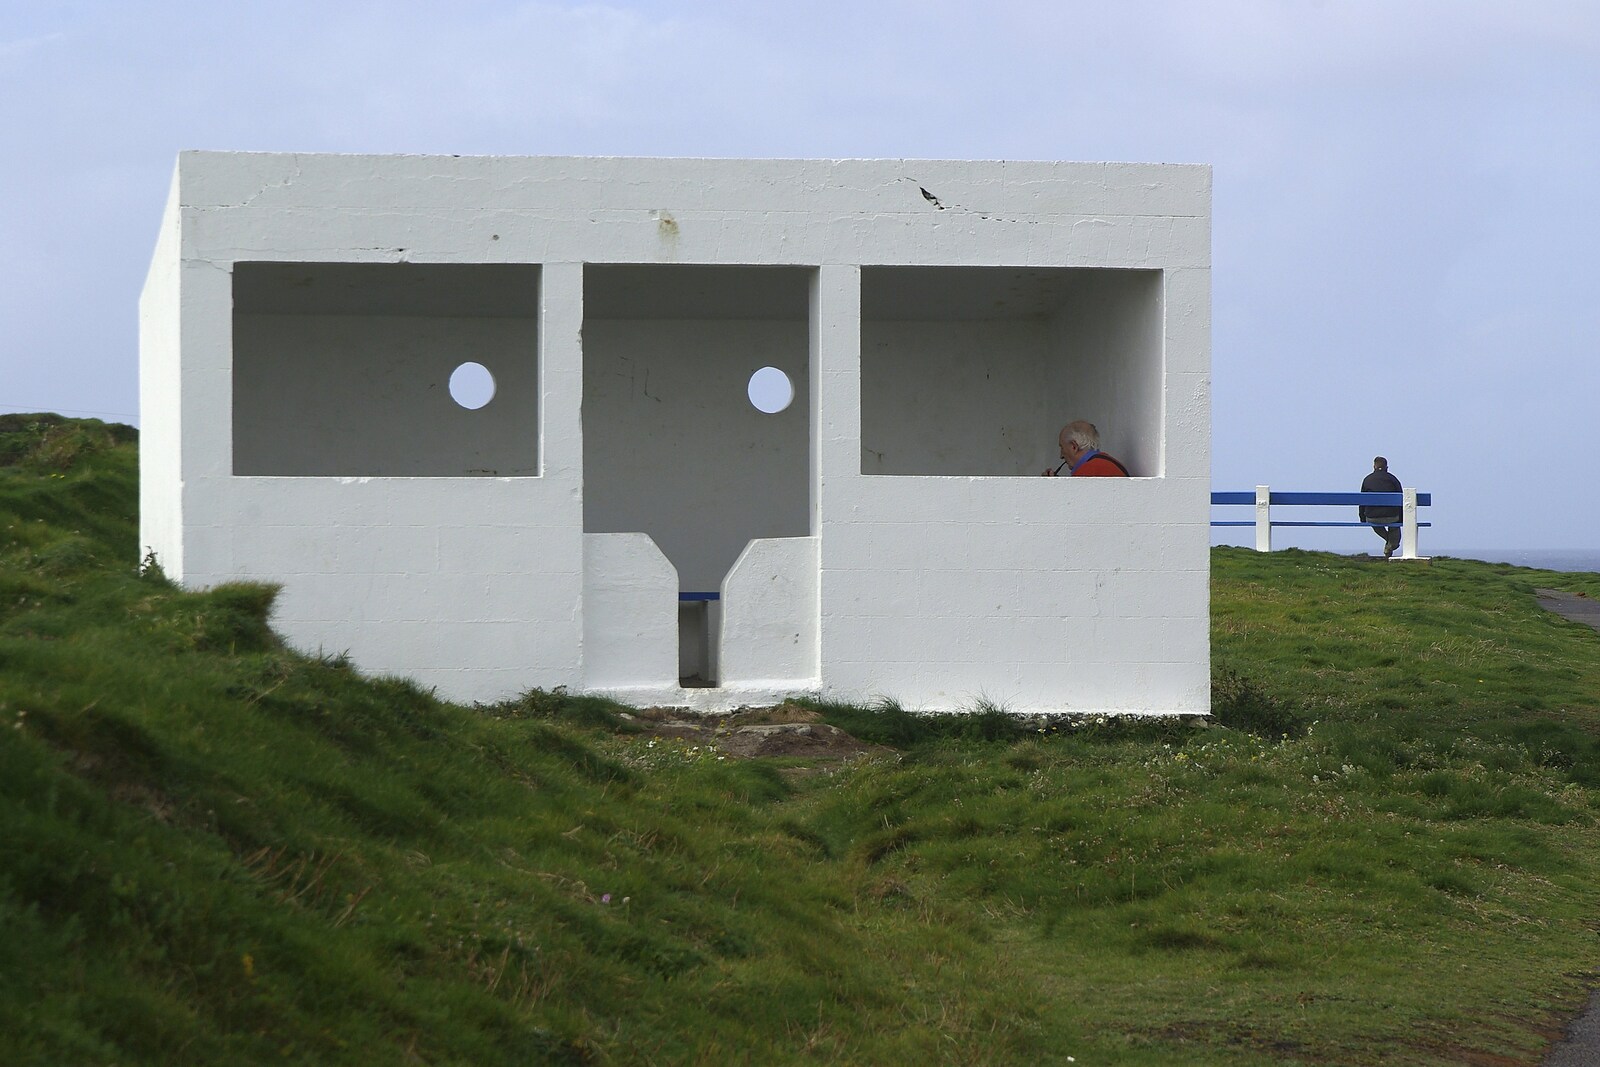 30th Birthday Party in Kilkee, County Clare, Ireland - 22nd September 2007: An old dude contemplates life and his pipe in a concrete shelter